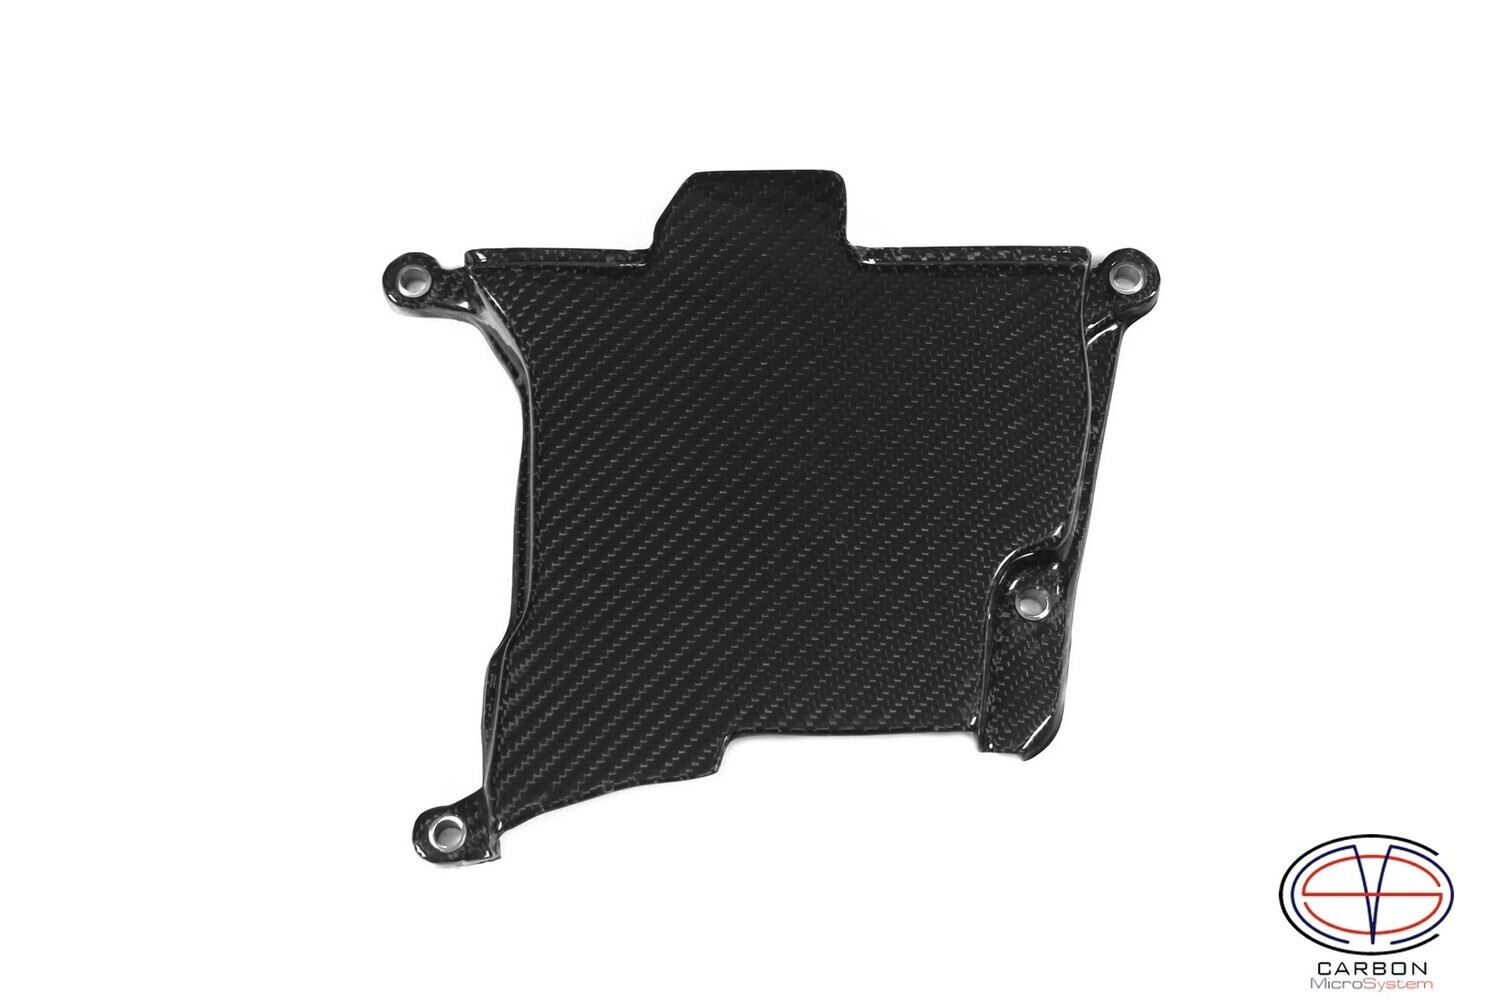 Center timing belt cover from Carbon Fiber for 4A-GE 20v head to 7A-GE engine